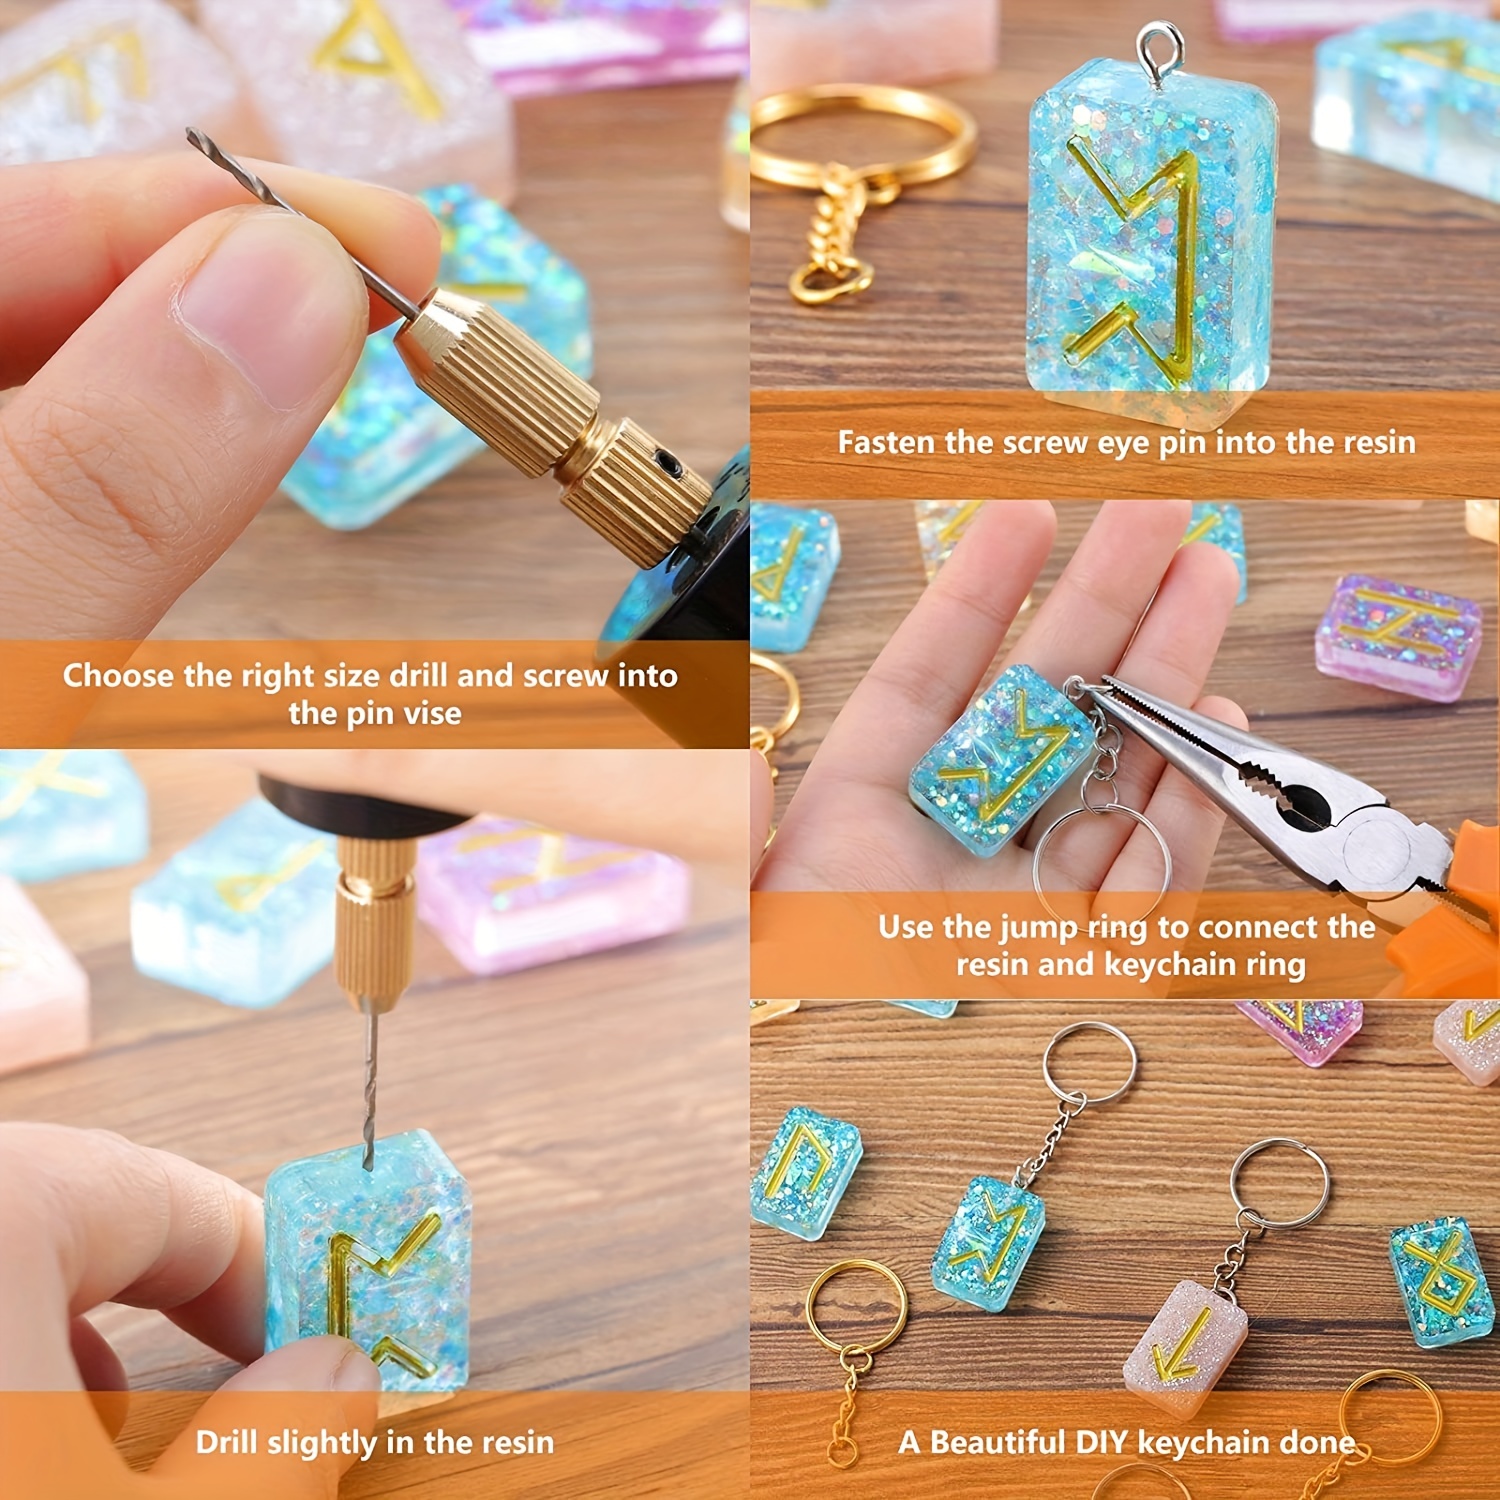 LET'S RESIN Resin Jewelry Making Kit,73Pcs Keychain Making Supplies, Drill  Press Vise, Steel Hand Resin Drill with Drill Bit, F-Quick Clamp, Keychain  Kit, Resin Tools for Keychains, Jewelry – Let's Resin